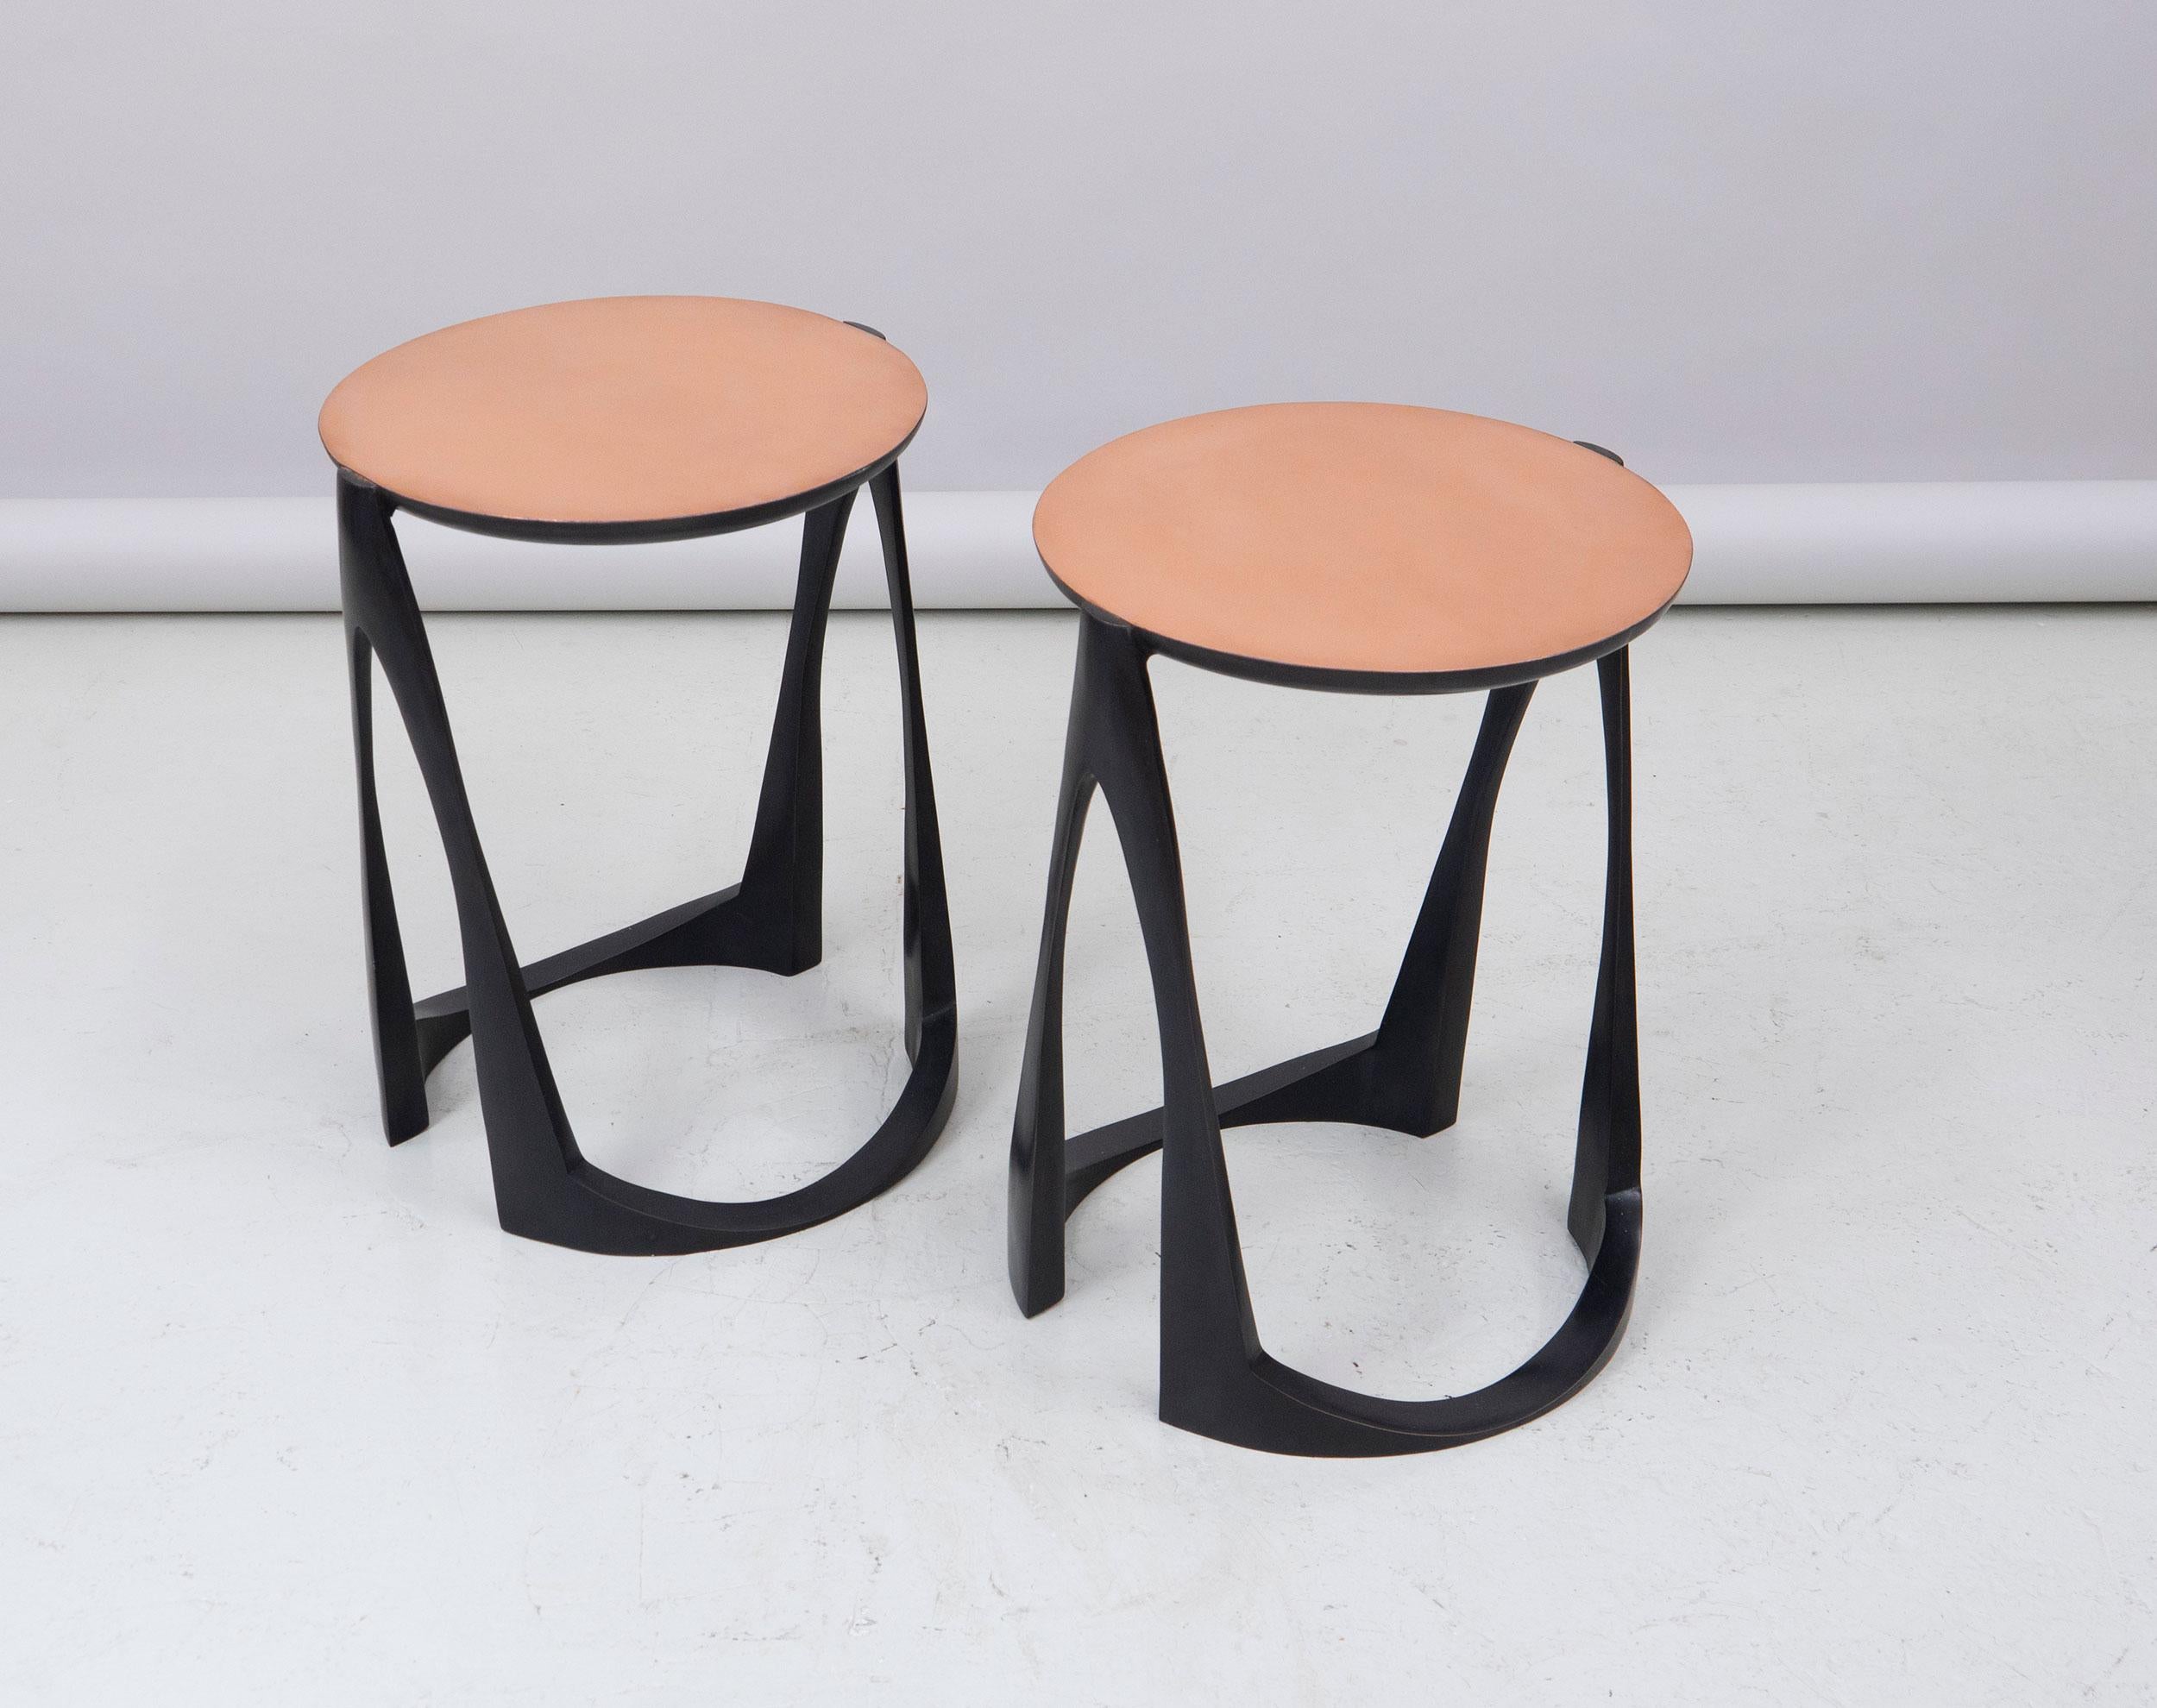 A pair of side tables in bronze with base in black patina and a top in natural bronze.